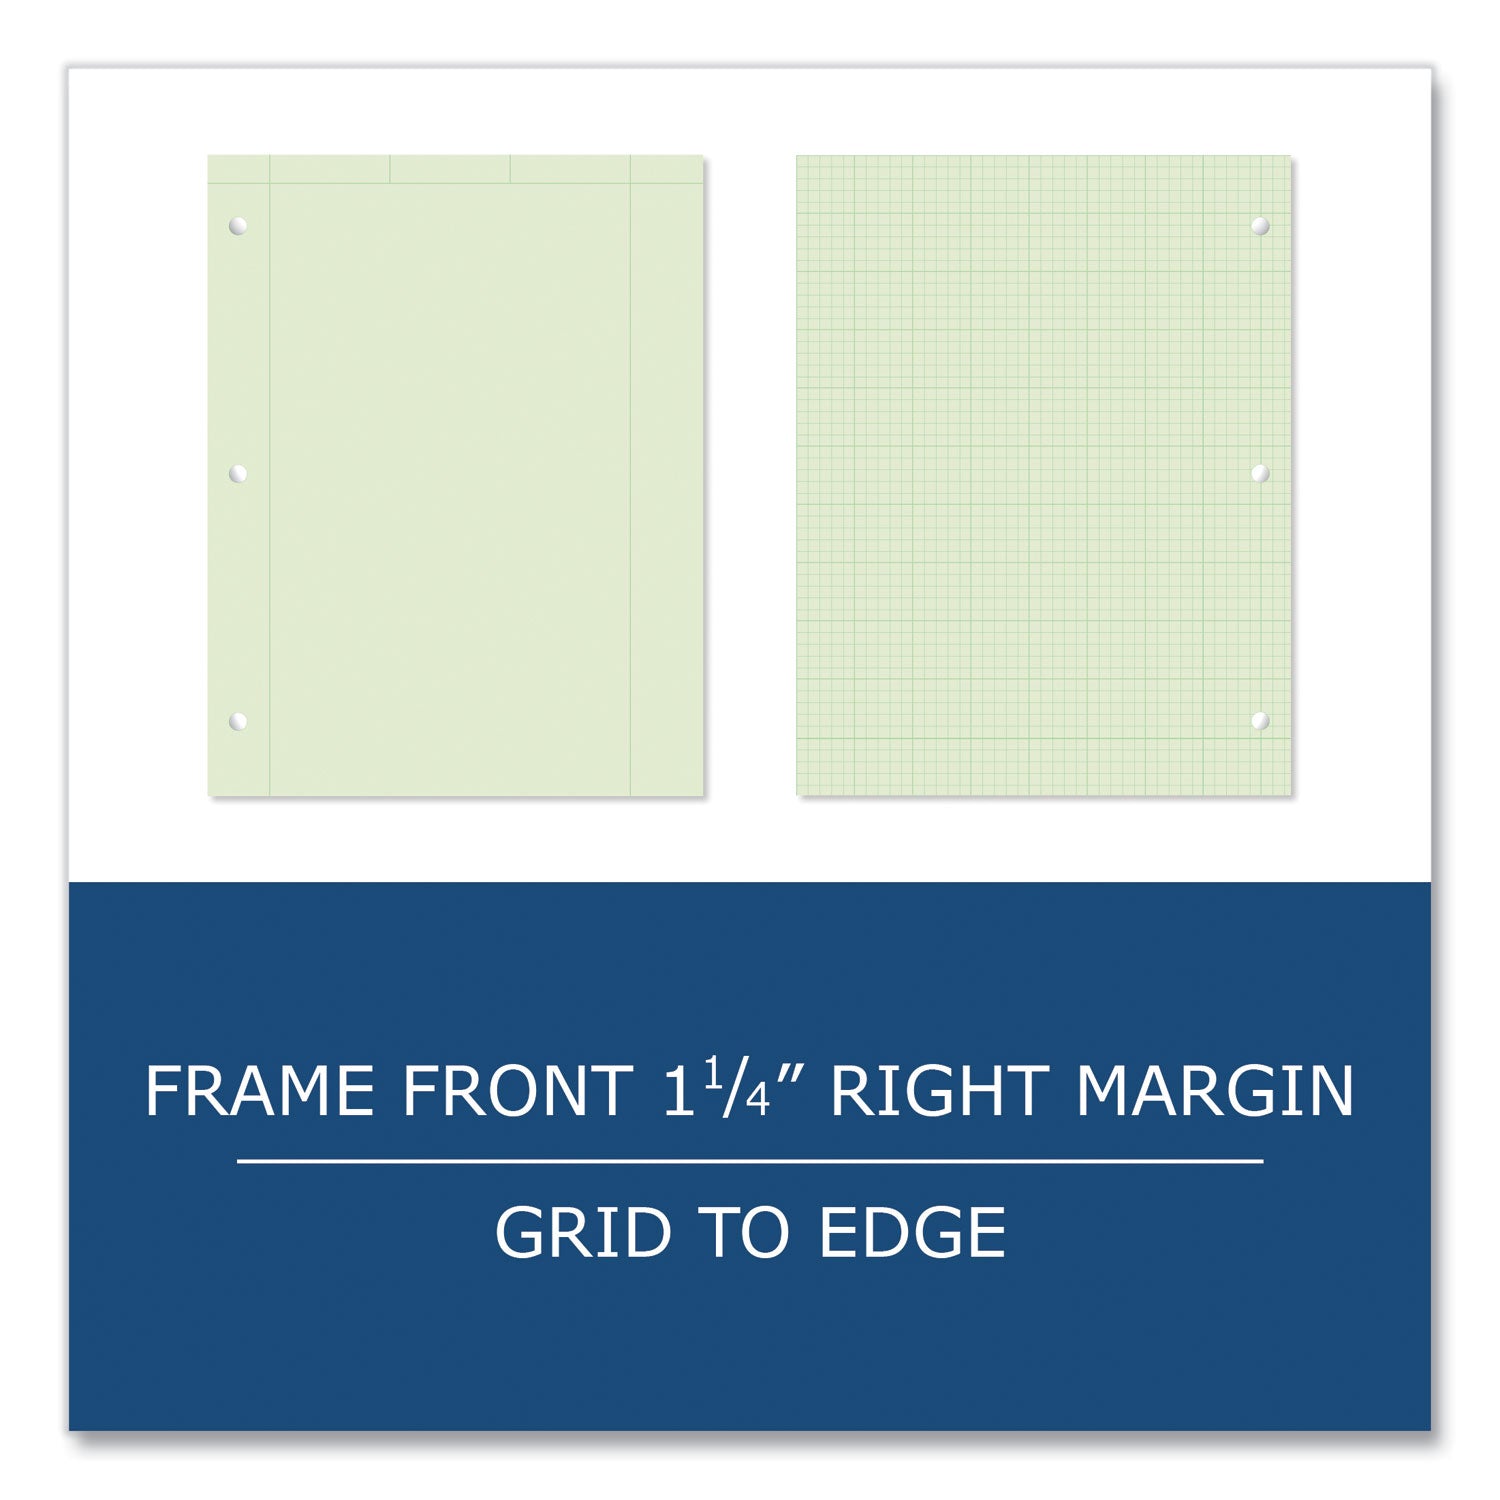 engineer-pad-125-margin-quad-rule-5-sq-in-1-sq-in-200-lt-green-85x11-sheets-pad-12-ct-ships-in-4-6-business-days_roa95589cs - 7